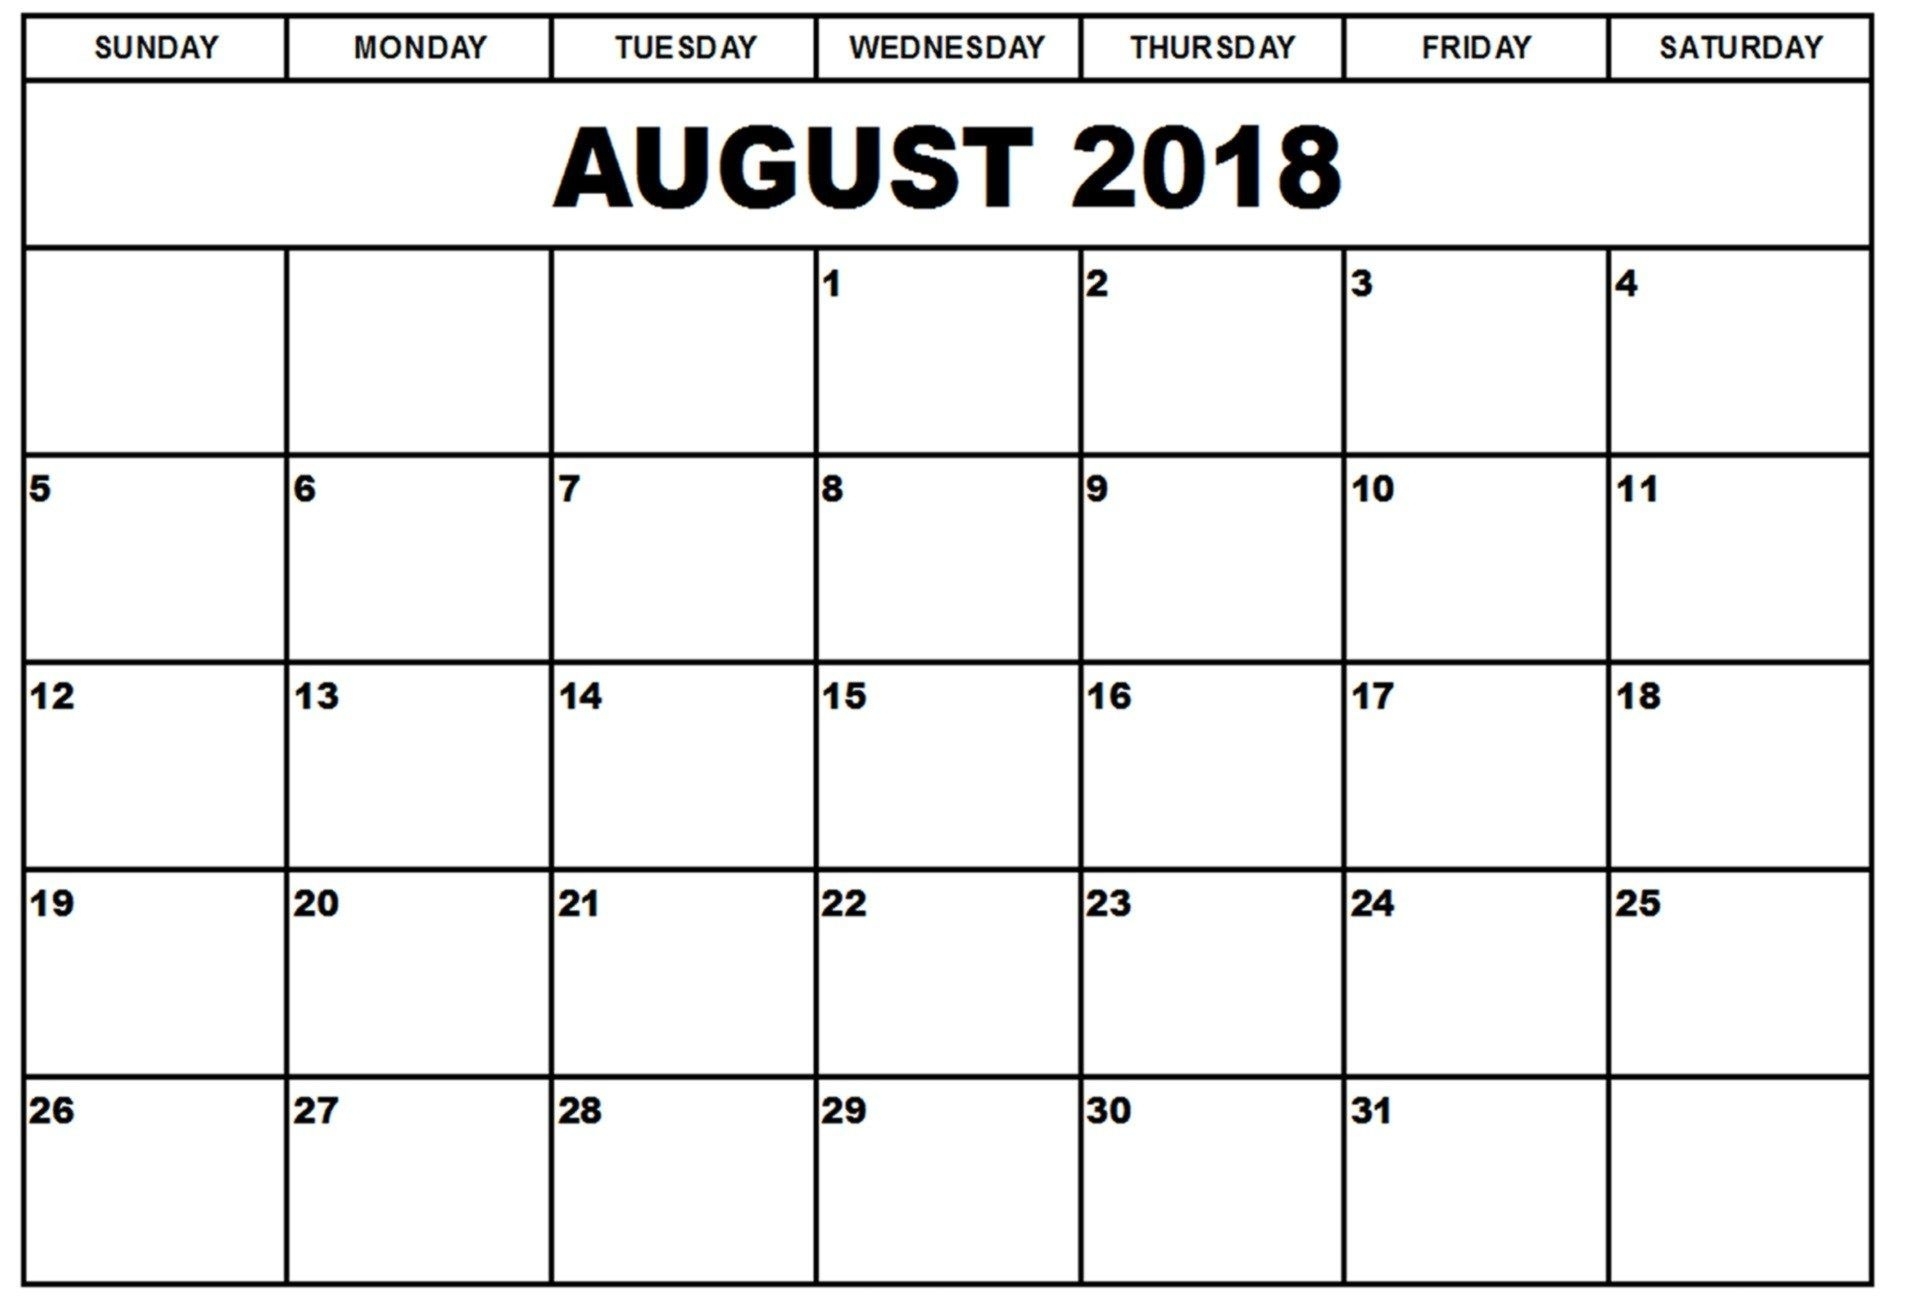 Get Calendar To Print August To Print